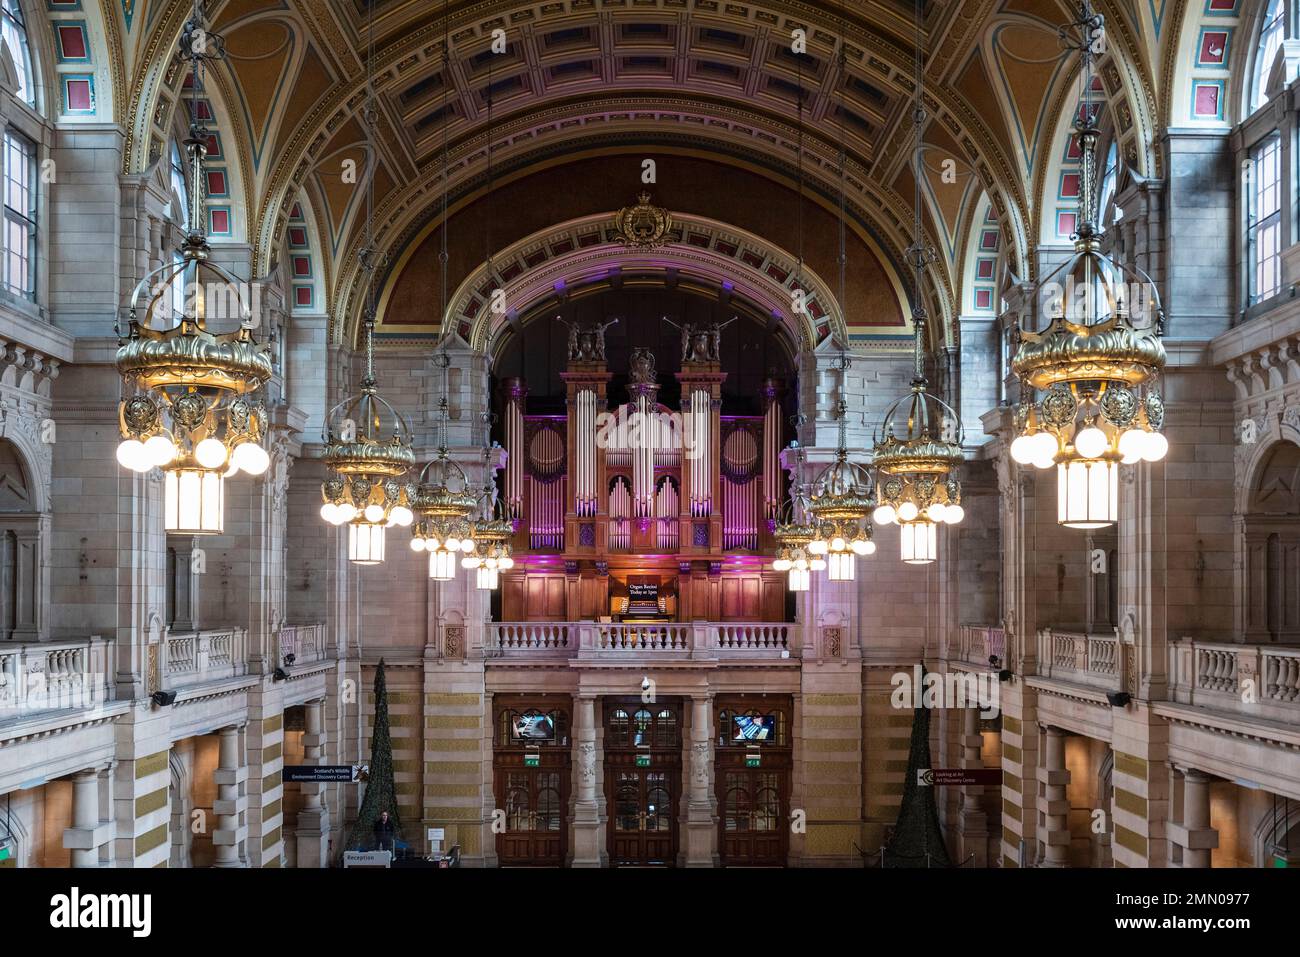 Royaume-Uni, Ecosse, Glasgow, Kelvingrove Art Gallery and Museum Banque D'Images